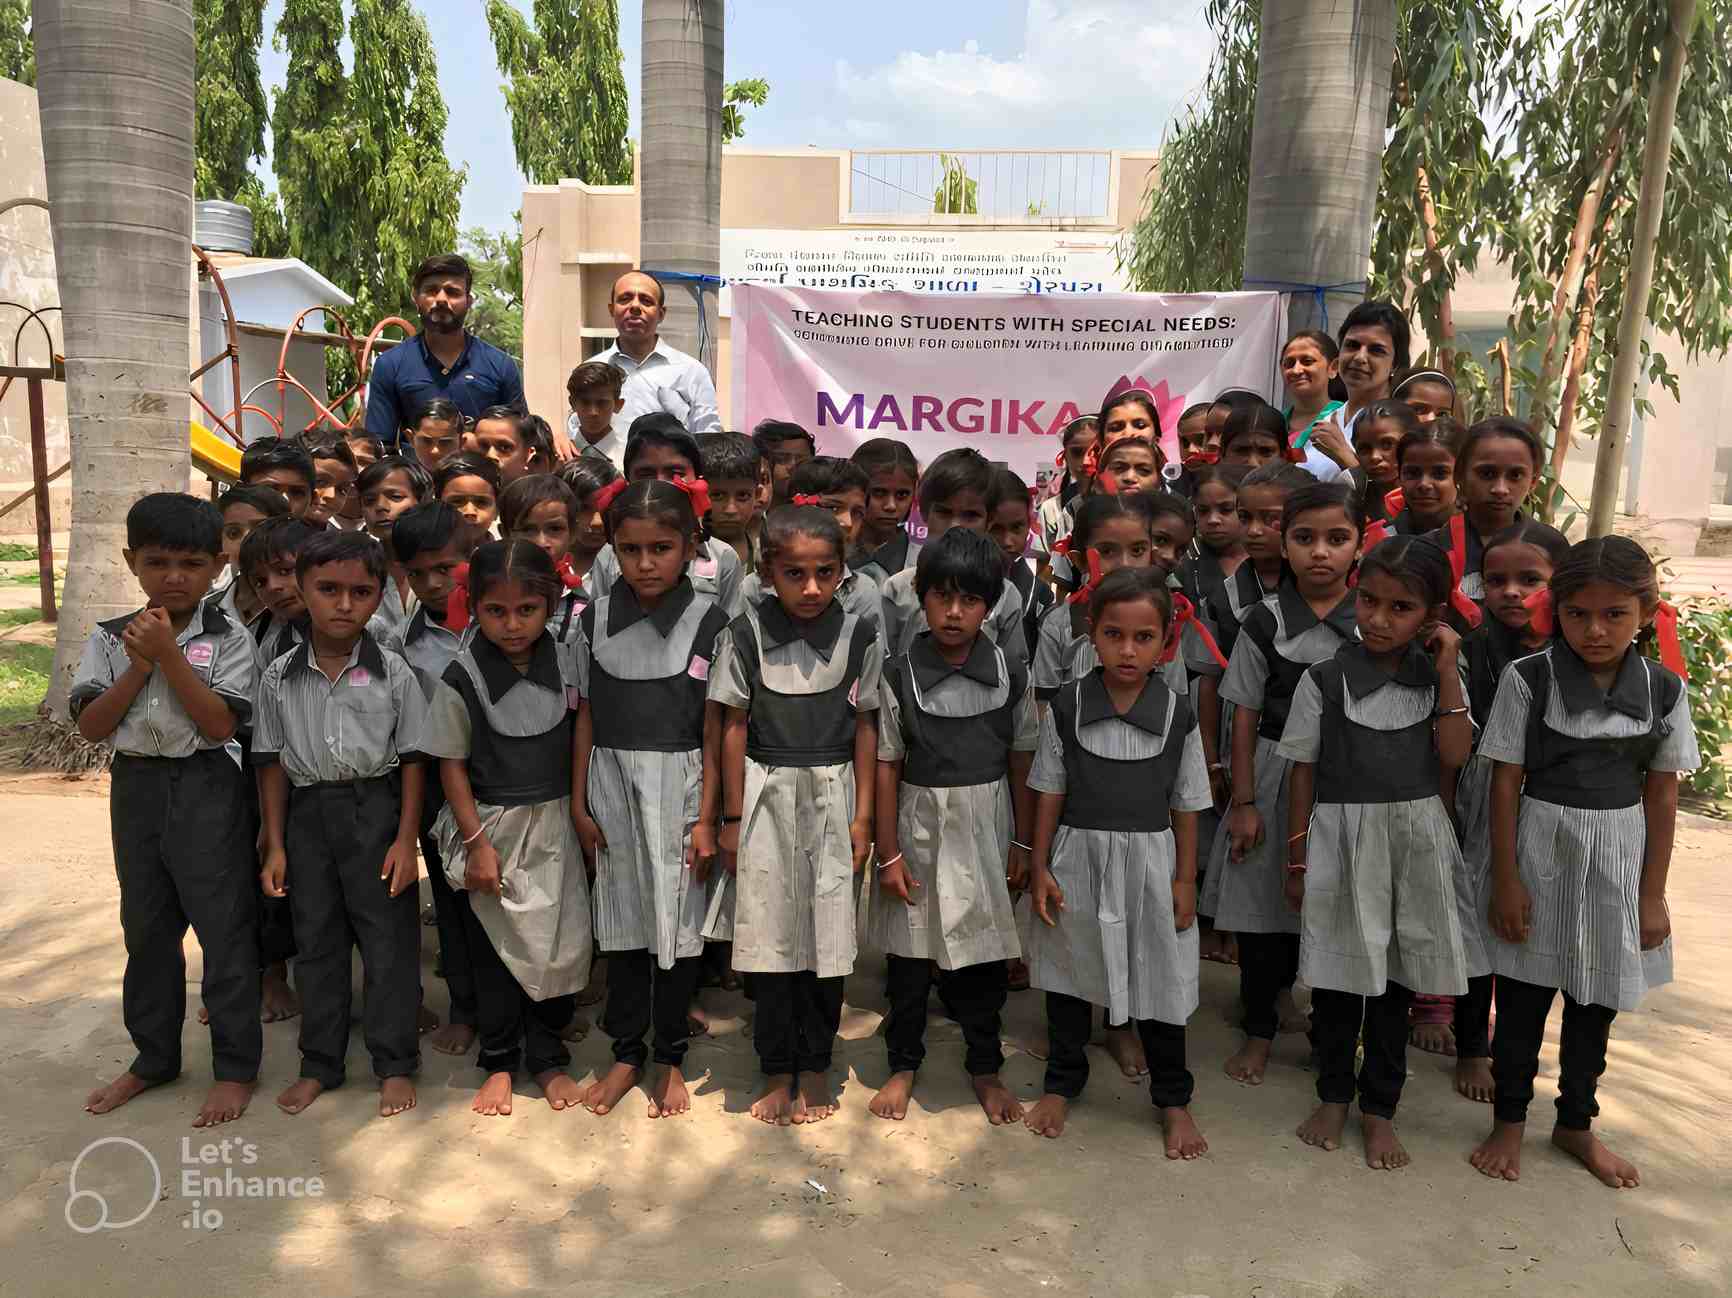 Children across the rural schools of Telangana were helped during the Covid pandemic to create access to education